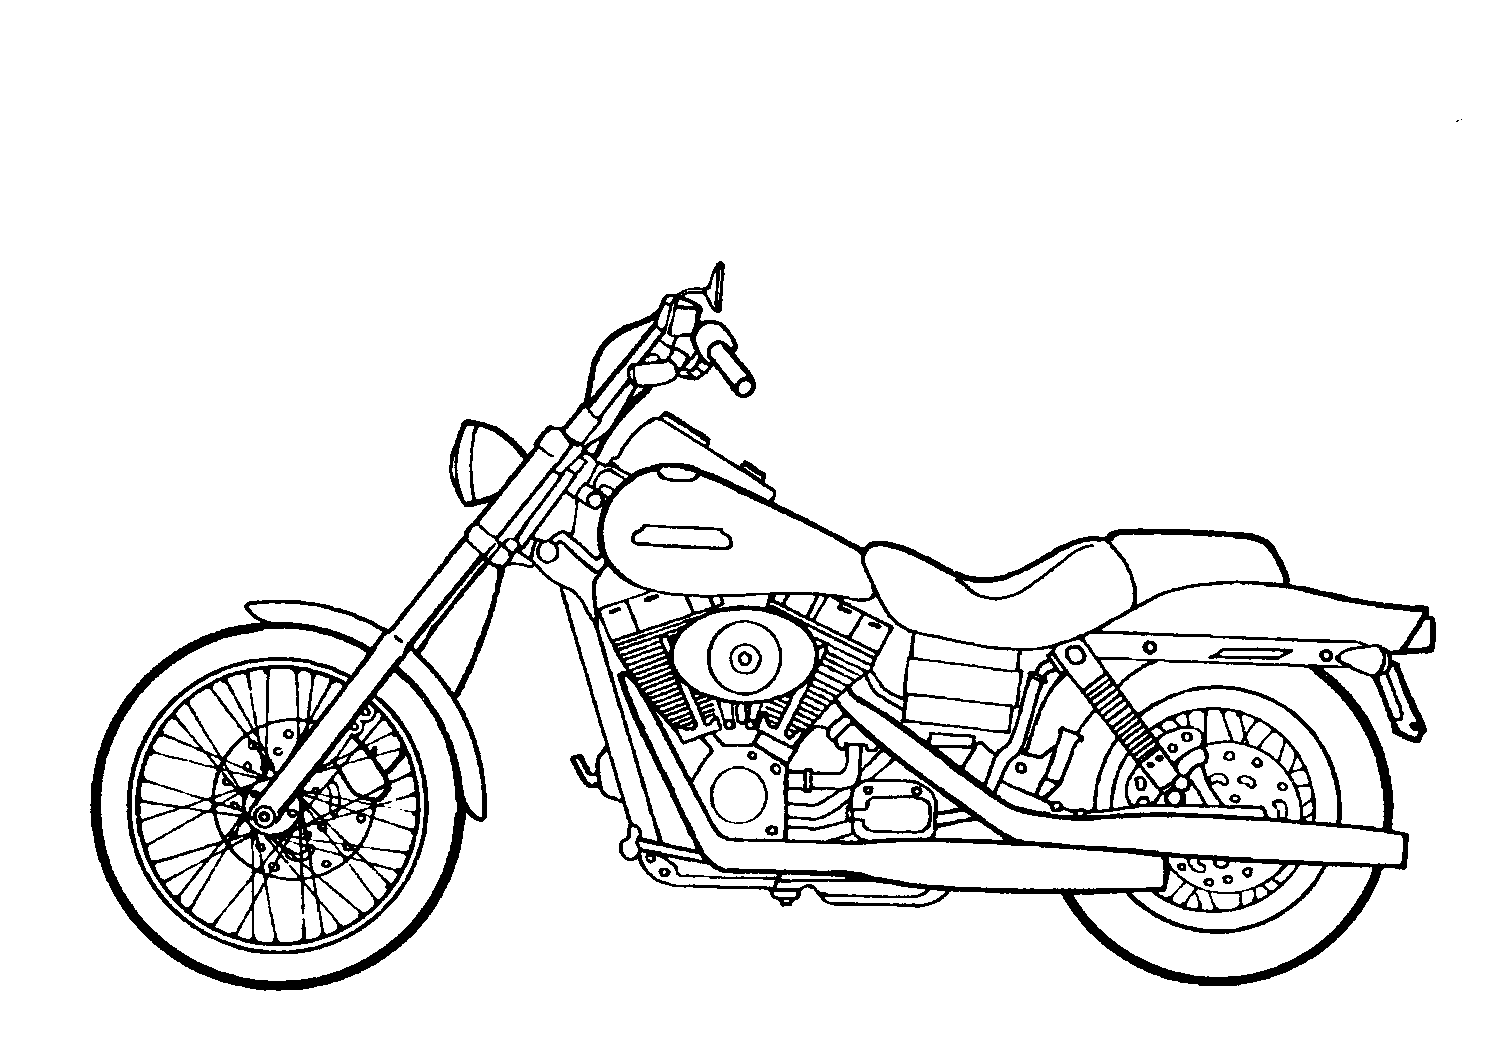 Free Printable Motorcycle Coloring Pages For Kids Download the perfect motocross pictures. free printable motorcycle coloring